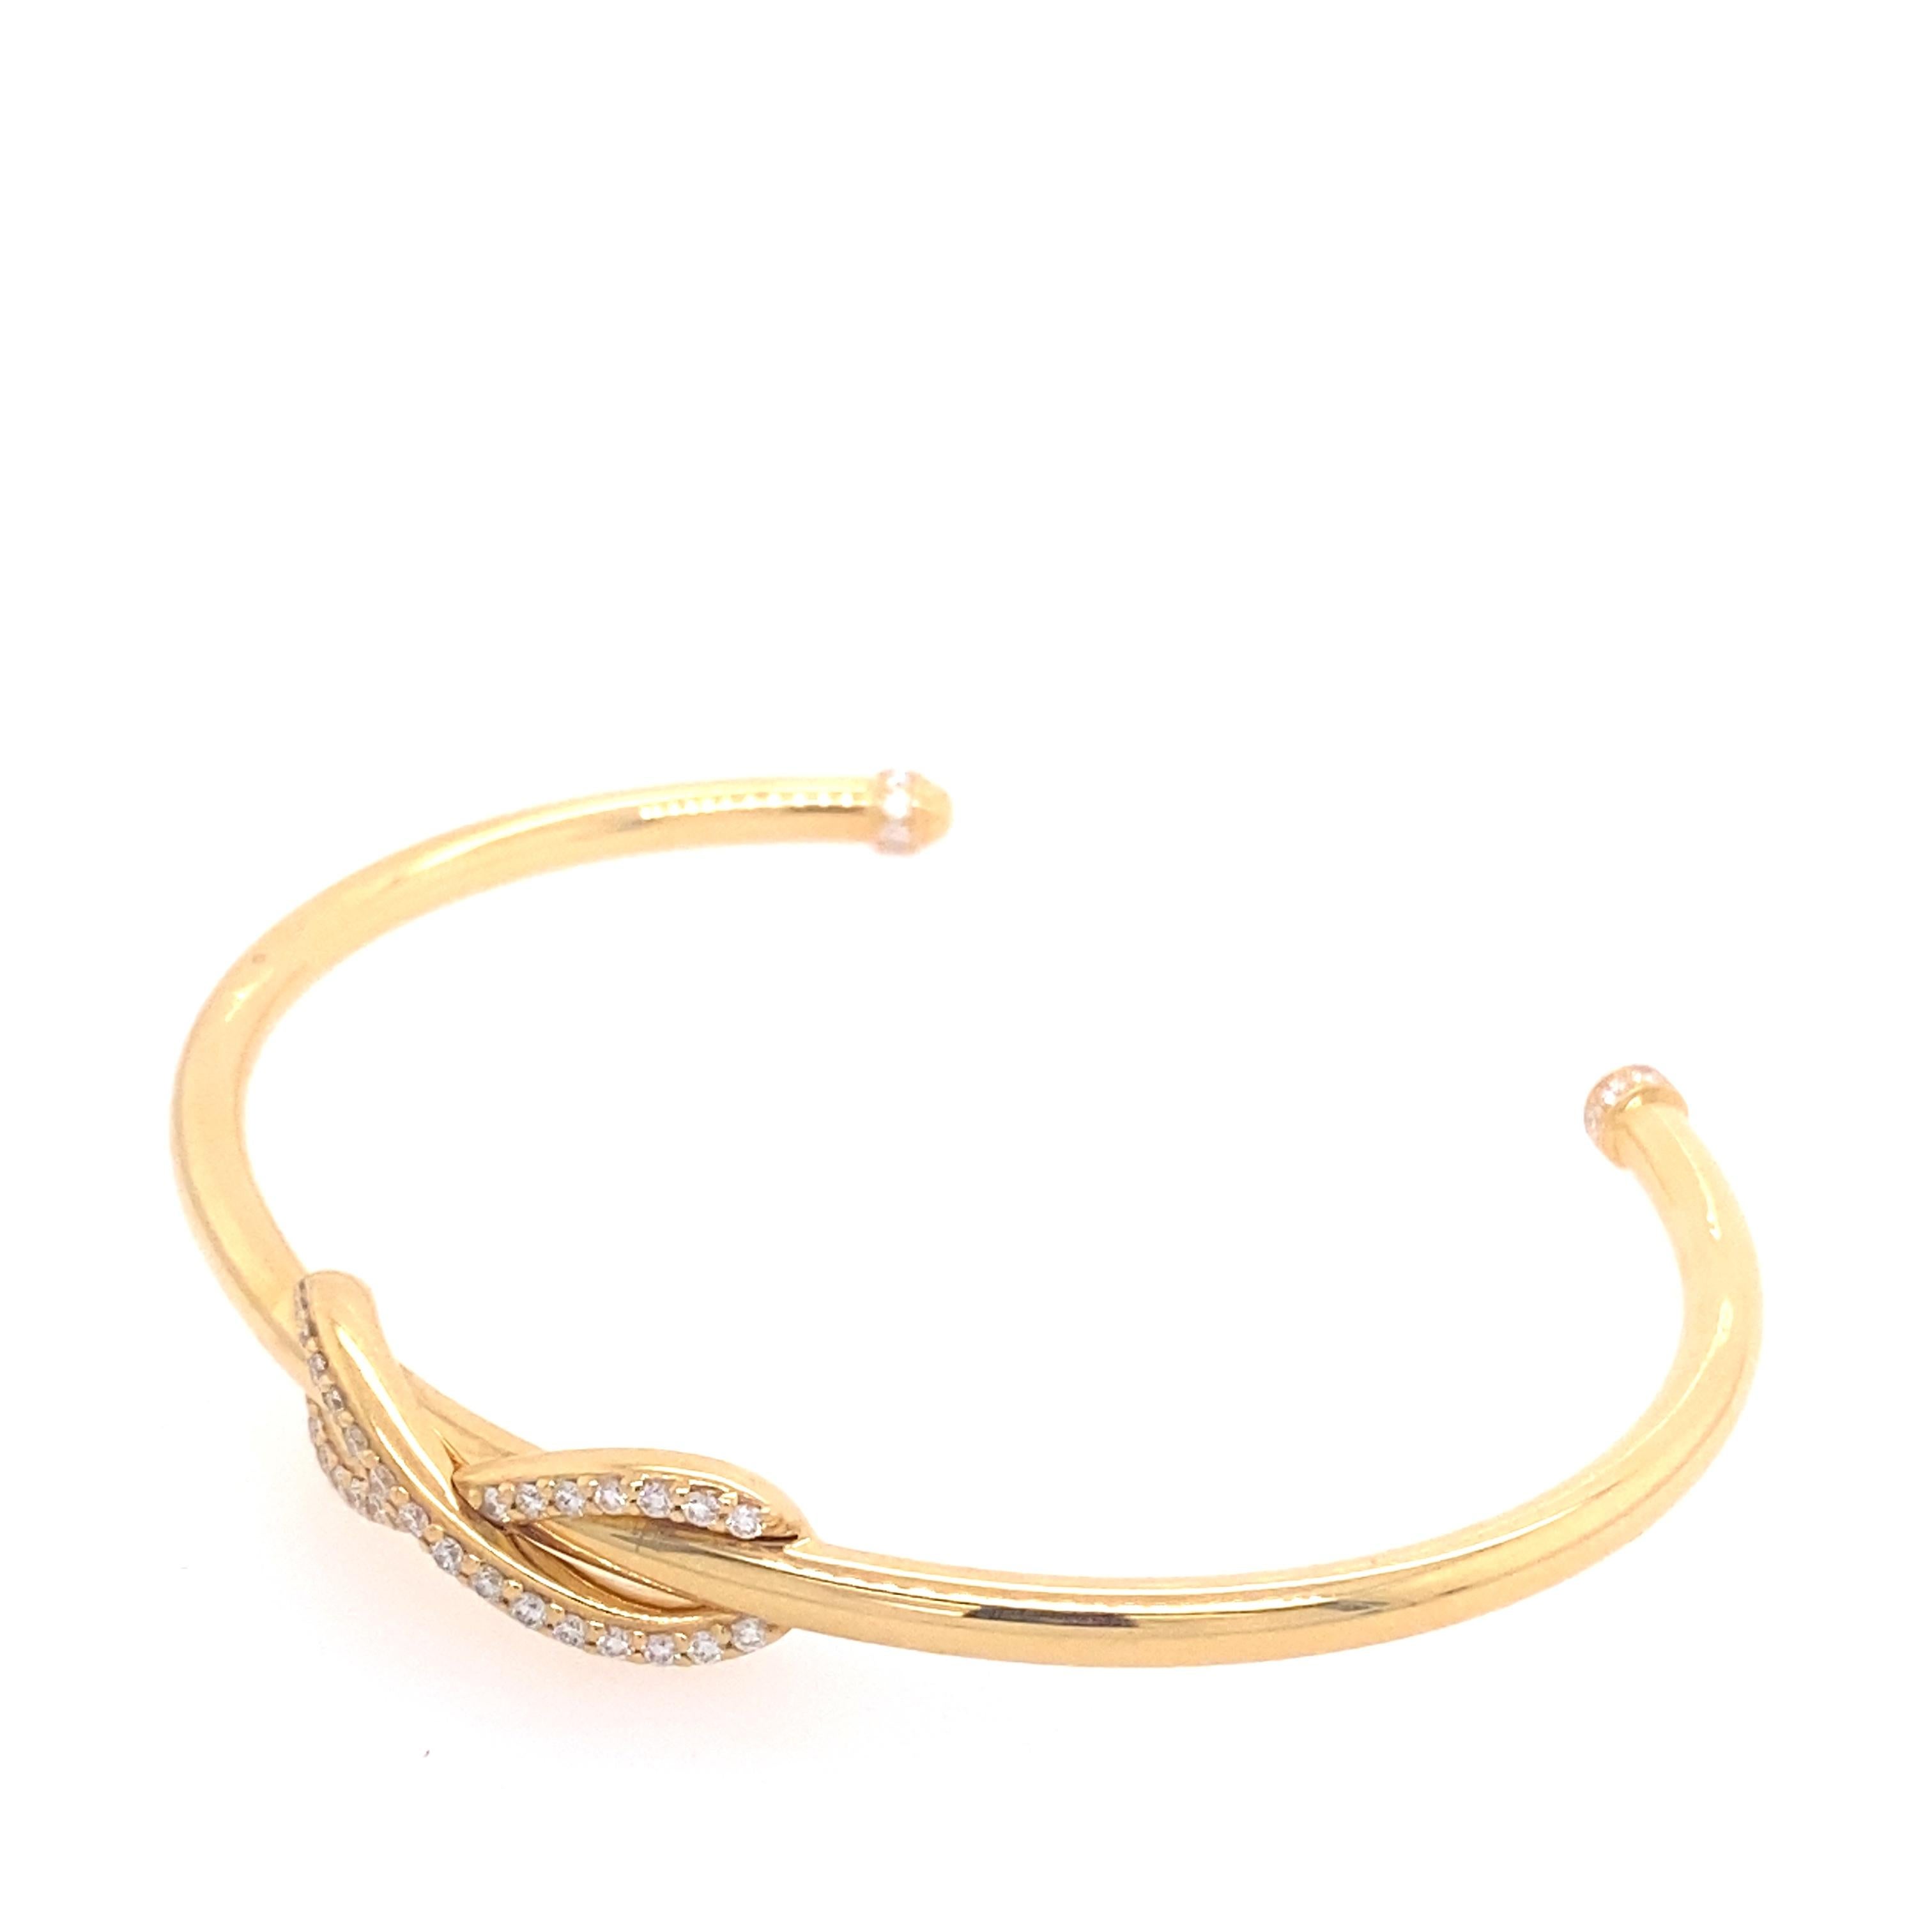 This classic Tiffany & Co. Diamond Infinity Cuff is a sleek, modern, 18kt yellow gold piece with 0.39ctw in round diamonds encrusting the infinity symbol and topping the ends of the cuff. The diamonds are of D-F color, VS-VVS quality. The bracelet